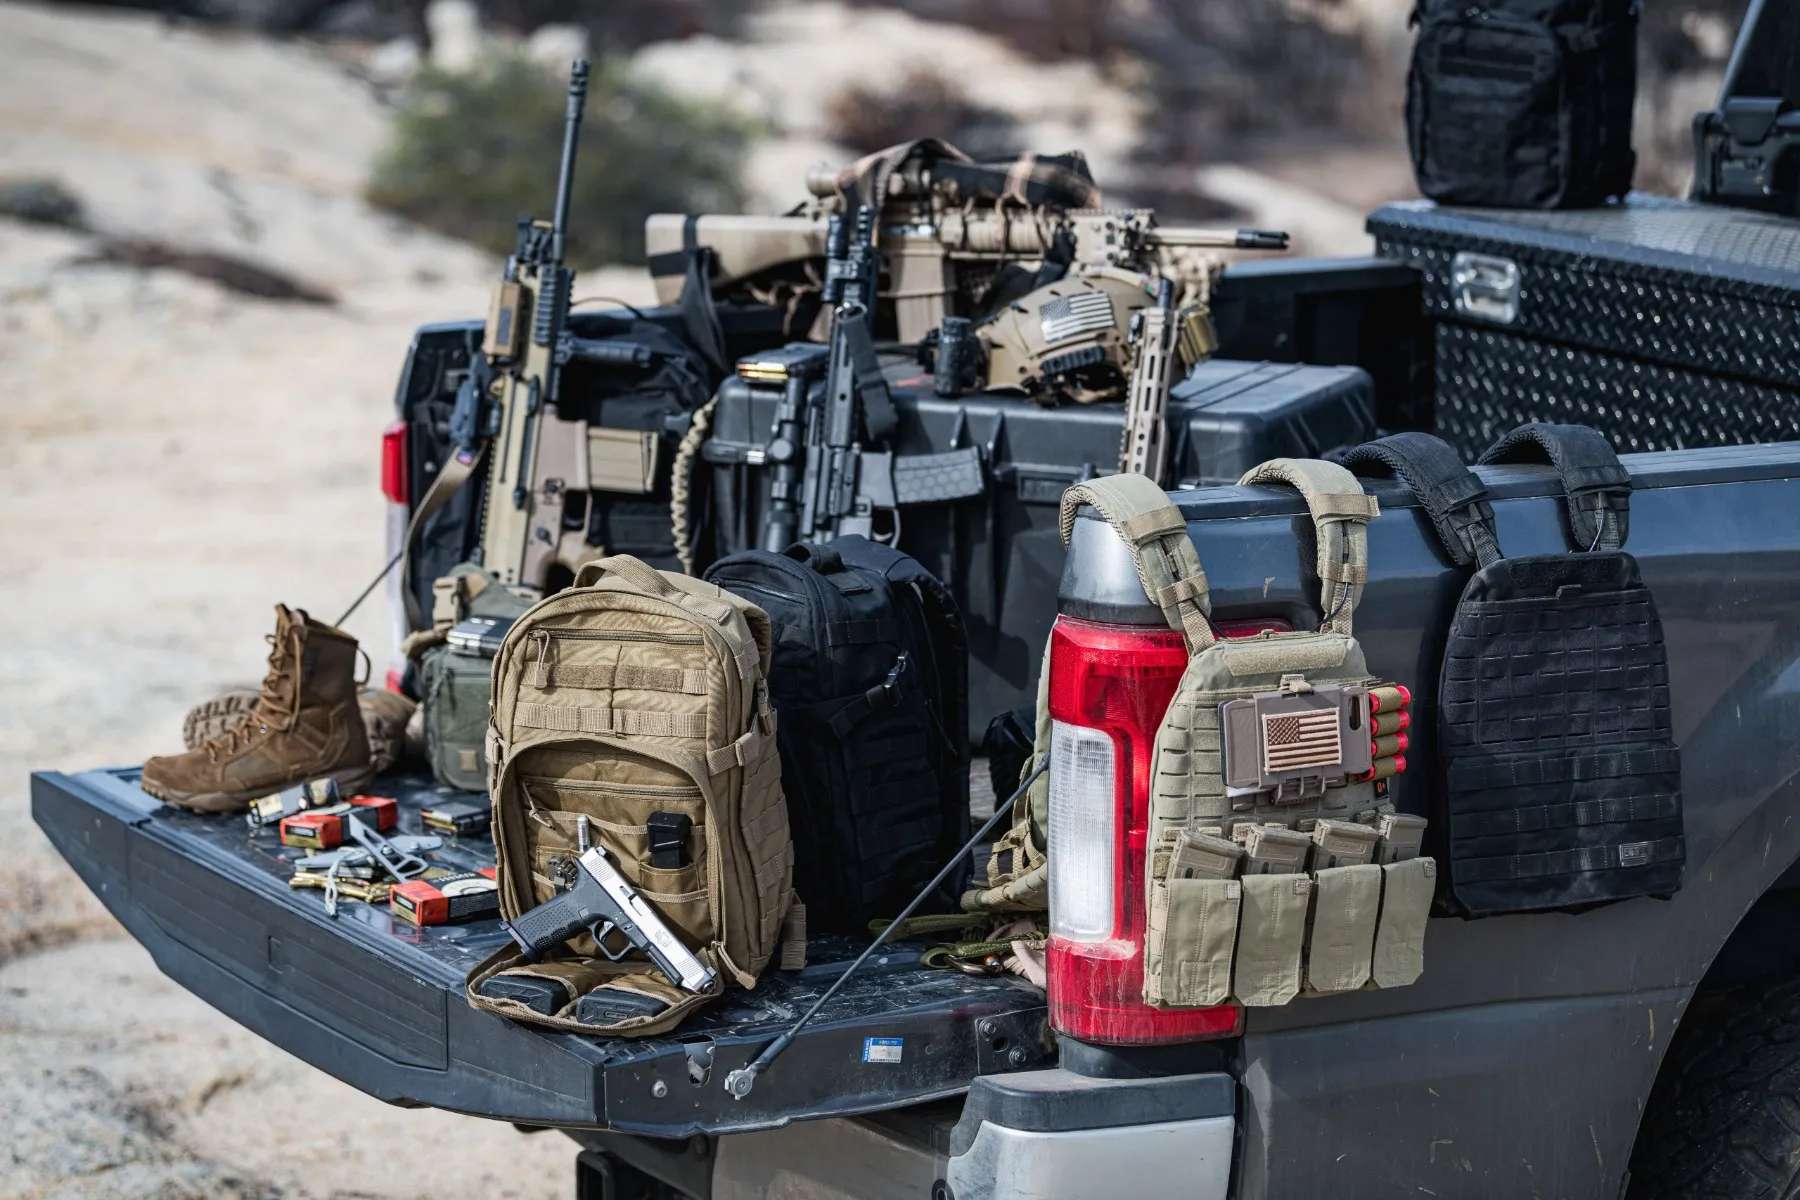 7 Great Tactical Gift Ideas for the Holidays